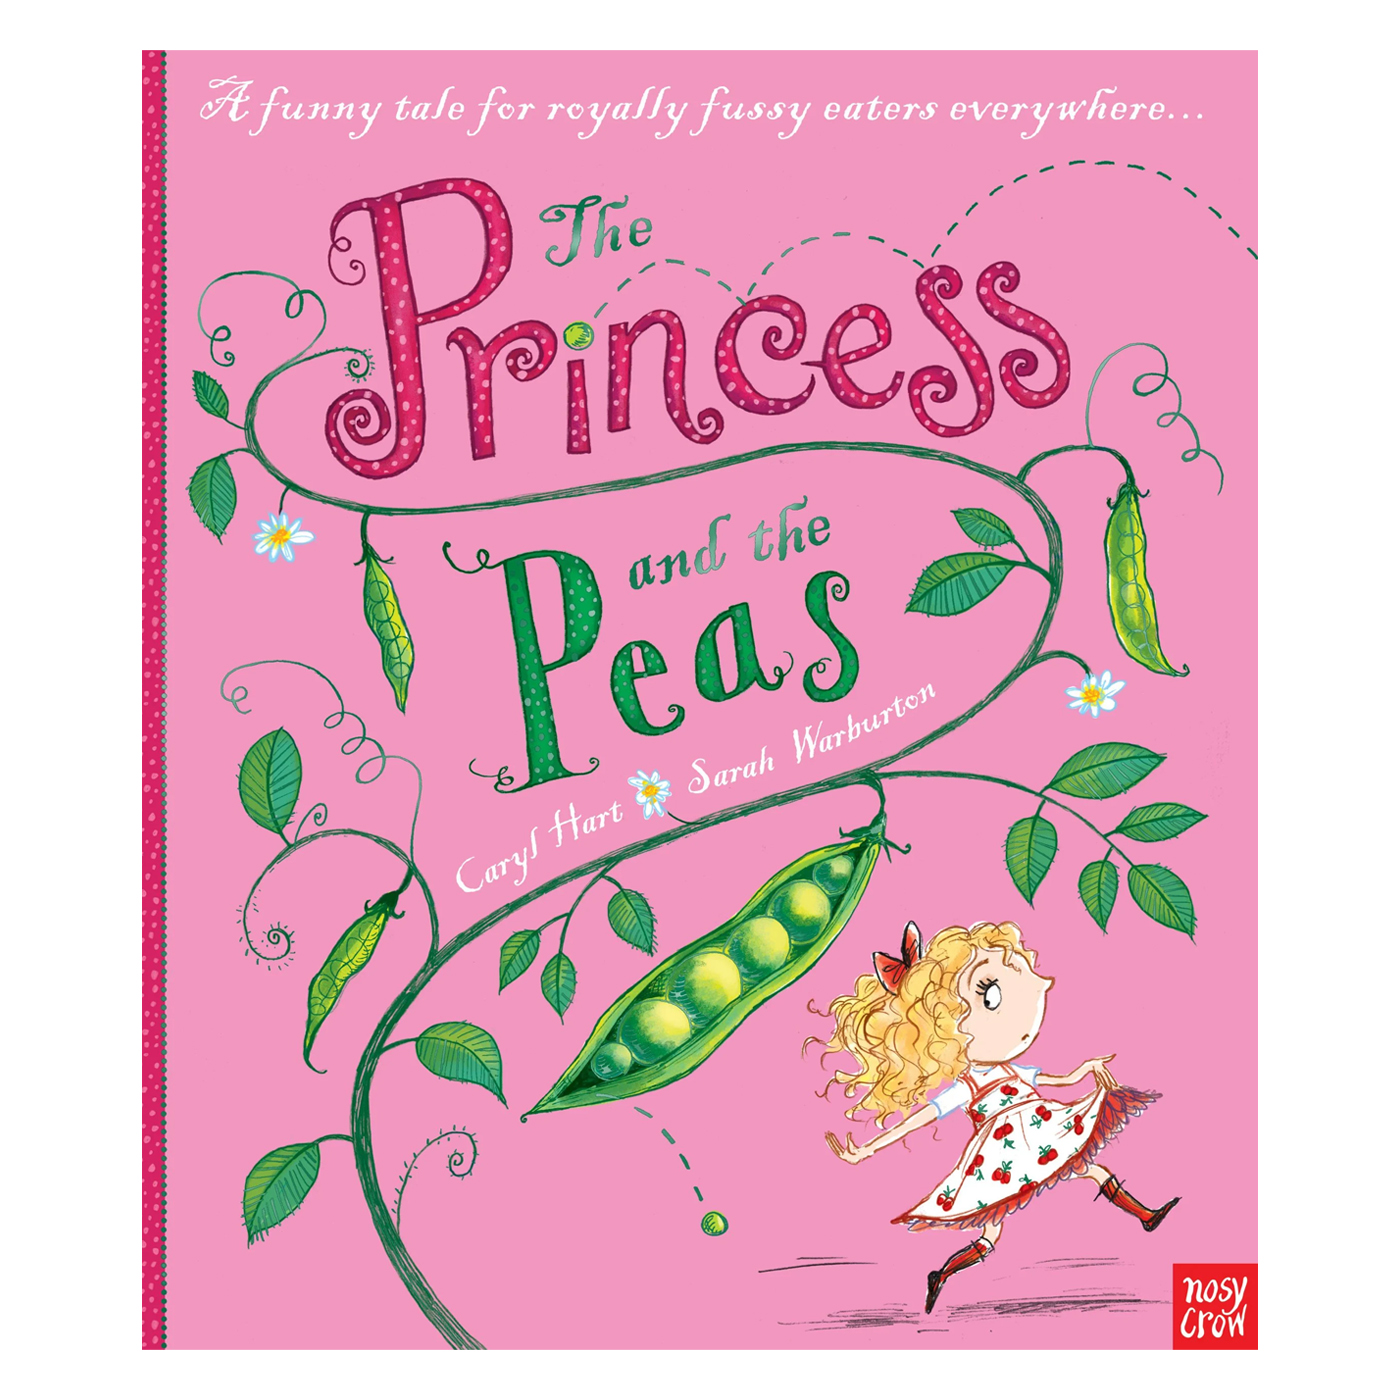  The Princess and the Peas